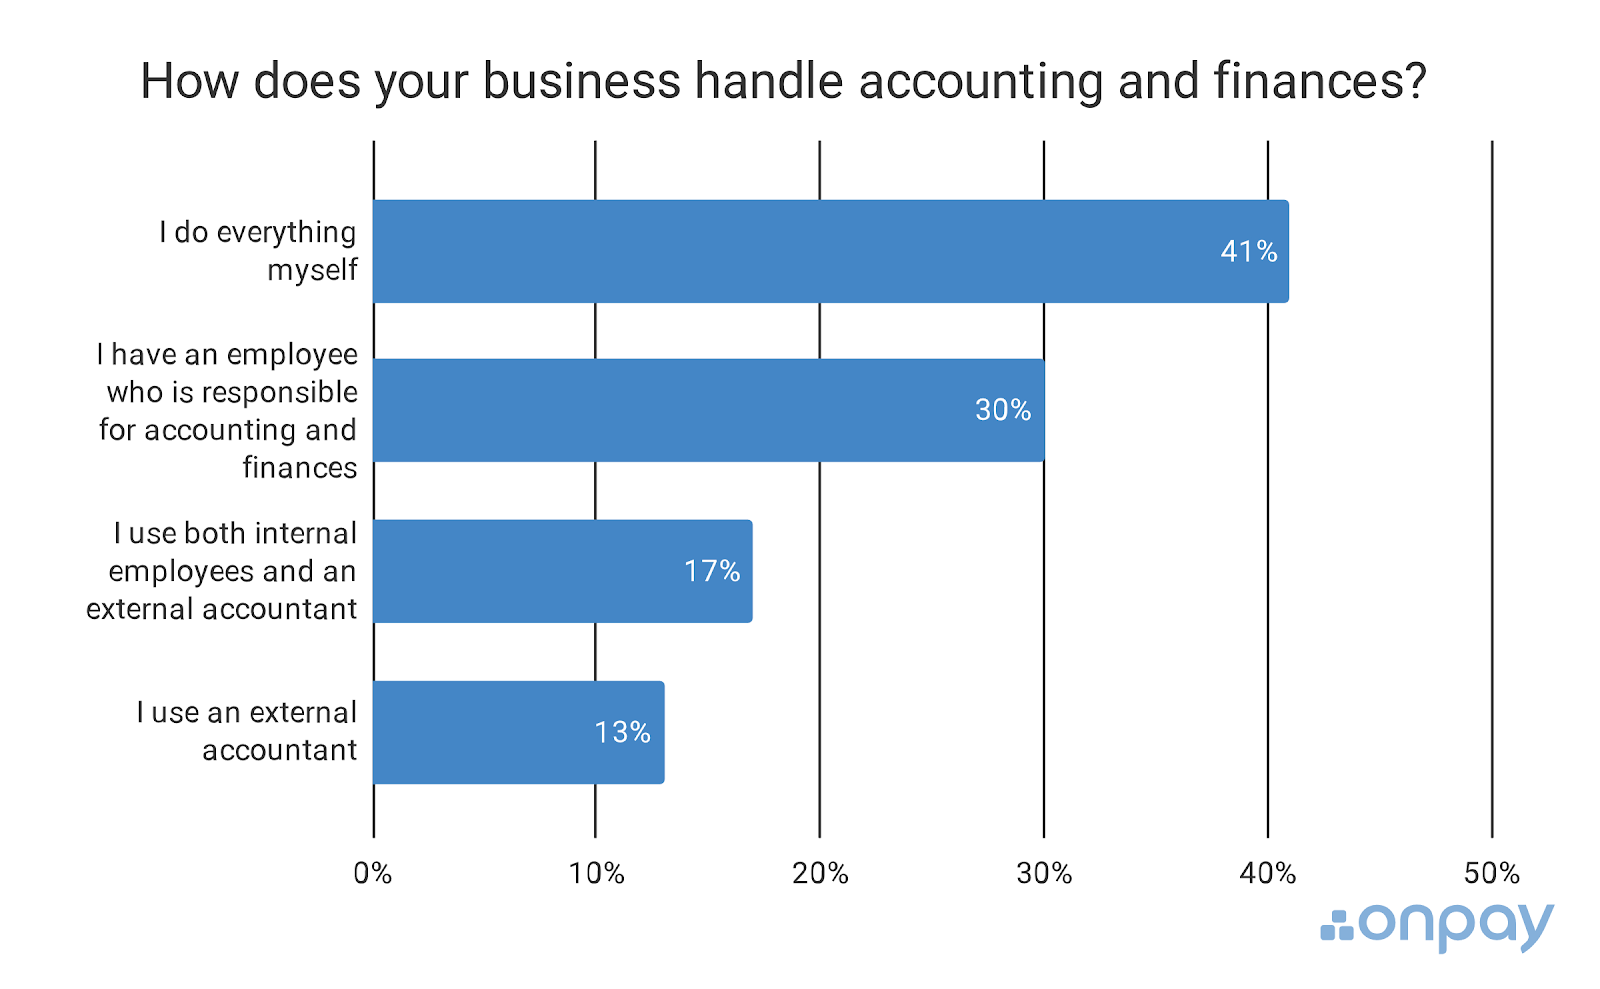 Infographic showing how businesses handle and outsource their accounting tasks

